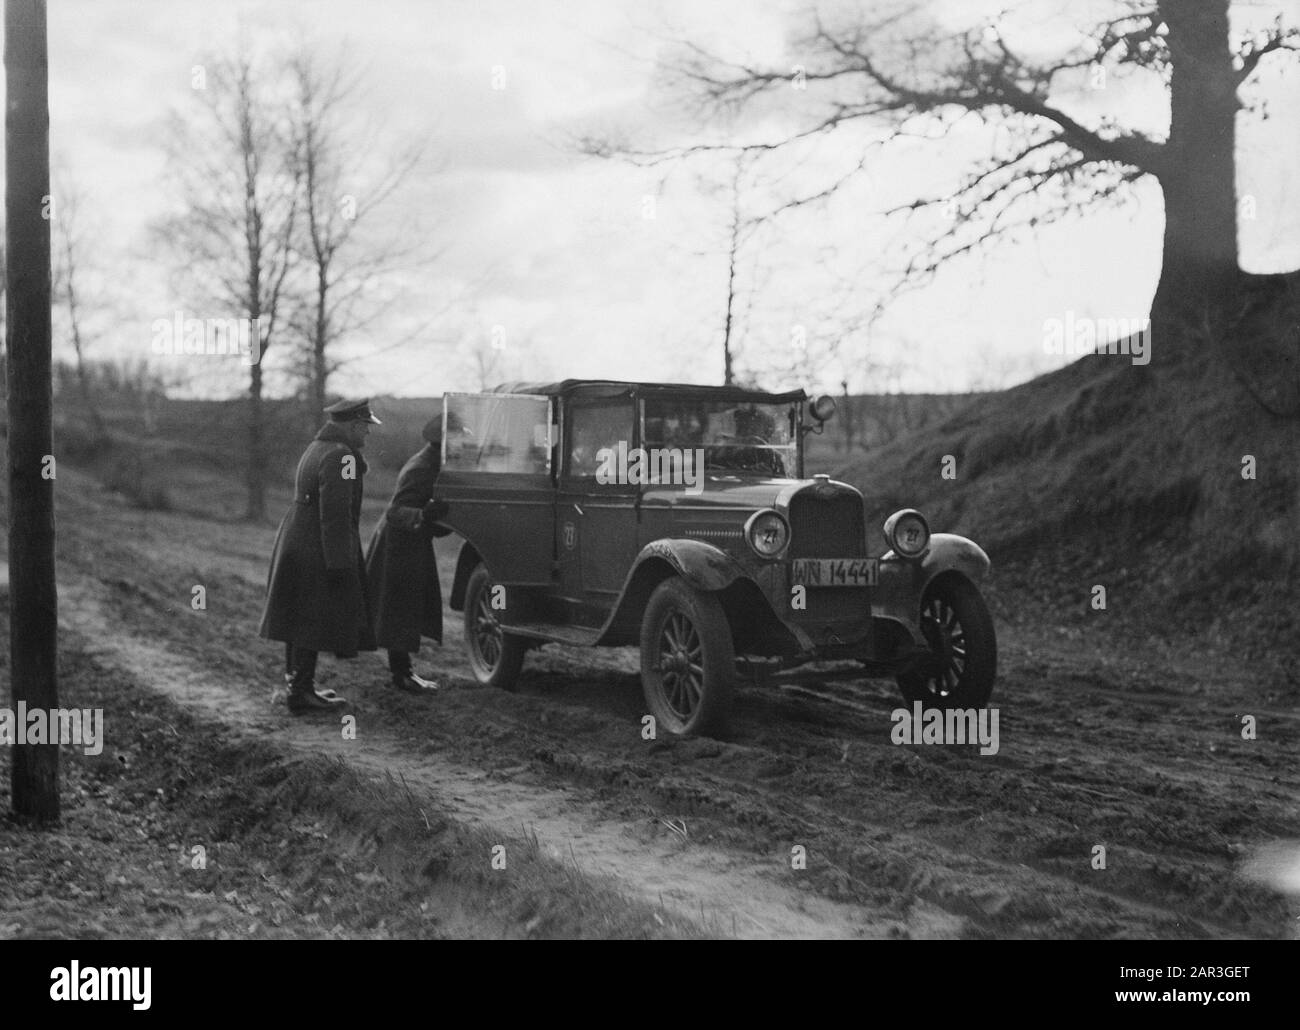 Journey to Lithuania  On the Vilnius-Kaunas road a car is searched by Polish border guards Date: 1934 Location: Lithuania, Poland Keywords: cars, border guards, military Stock Photo